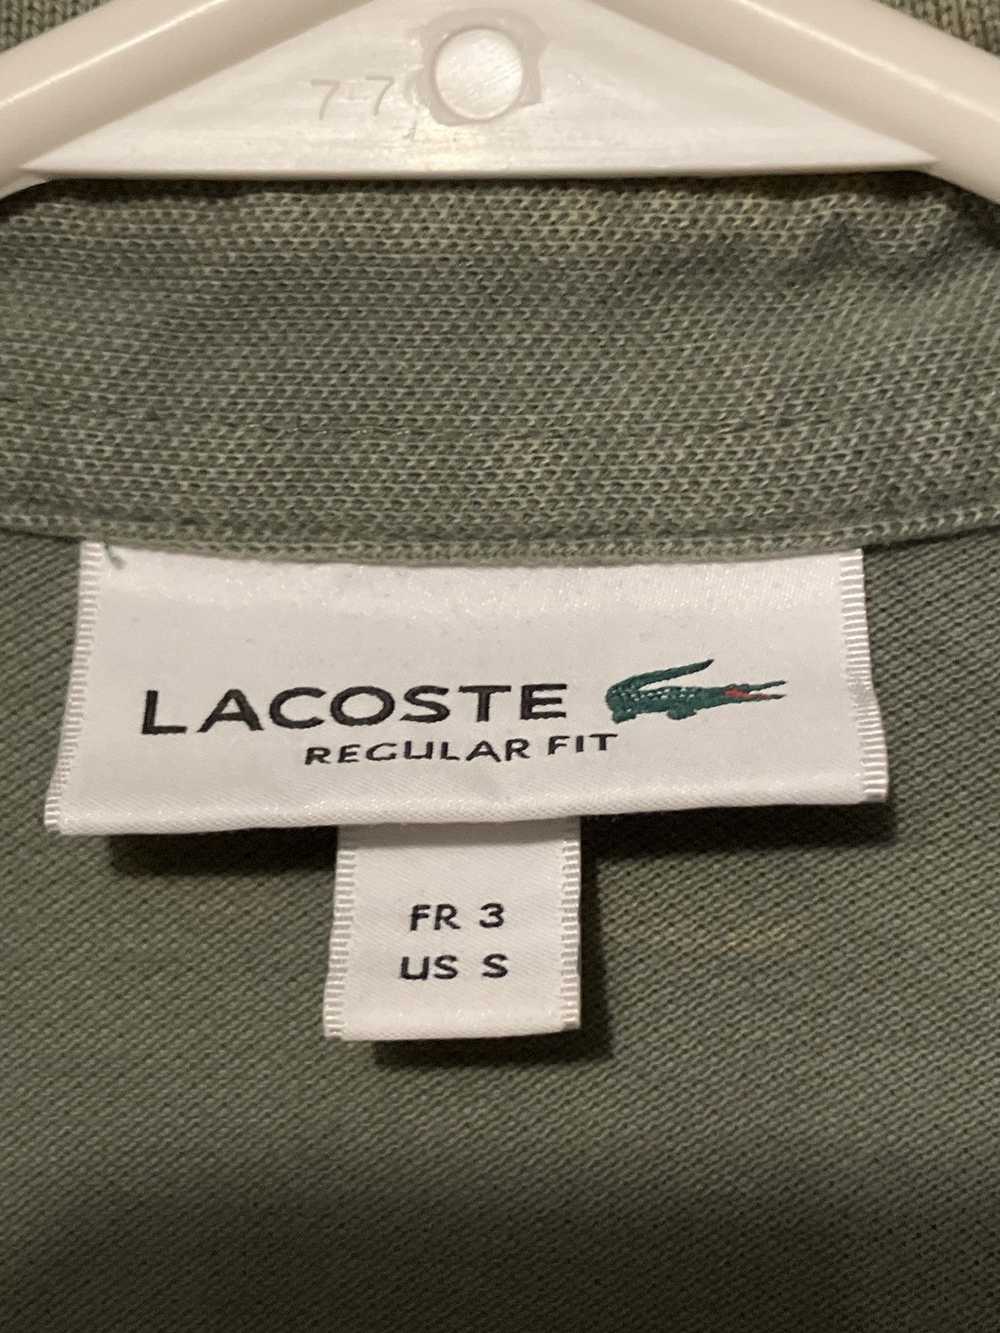 Lacoste Lacoste Polo Shirt. Small - image 3